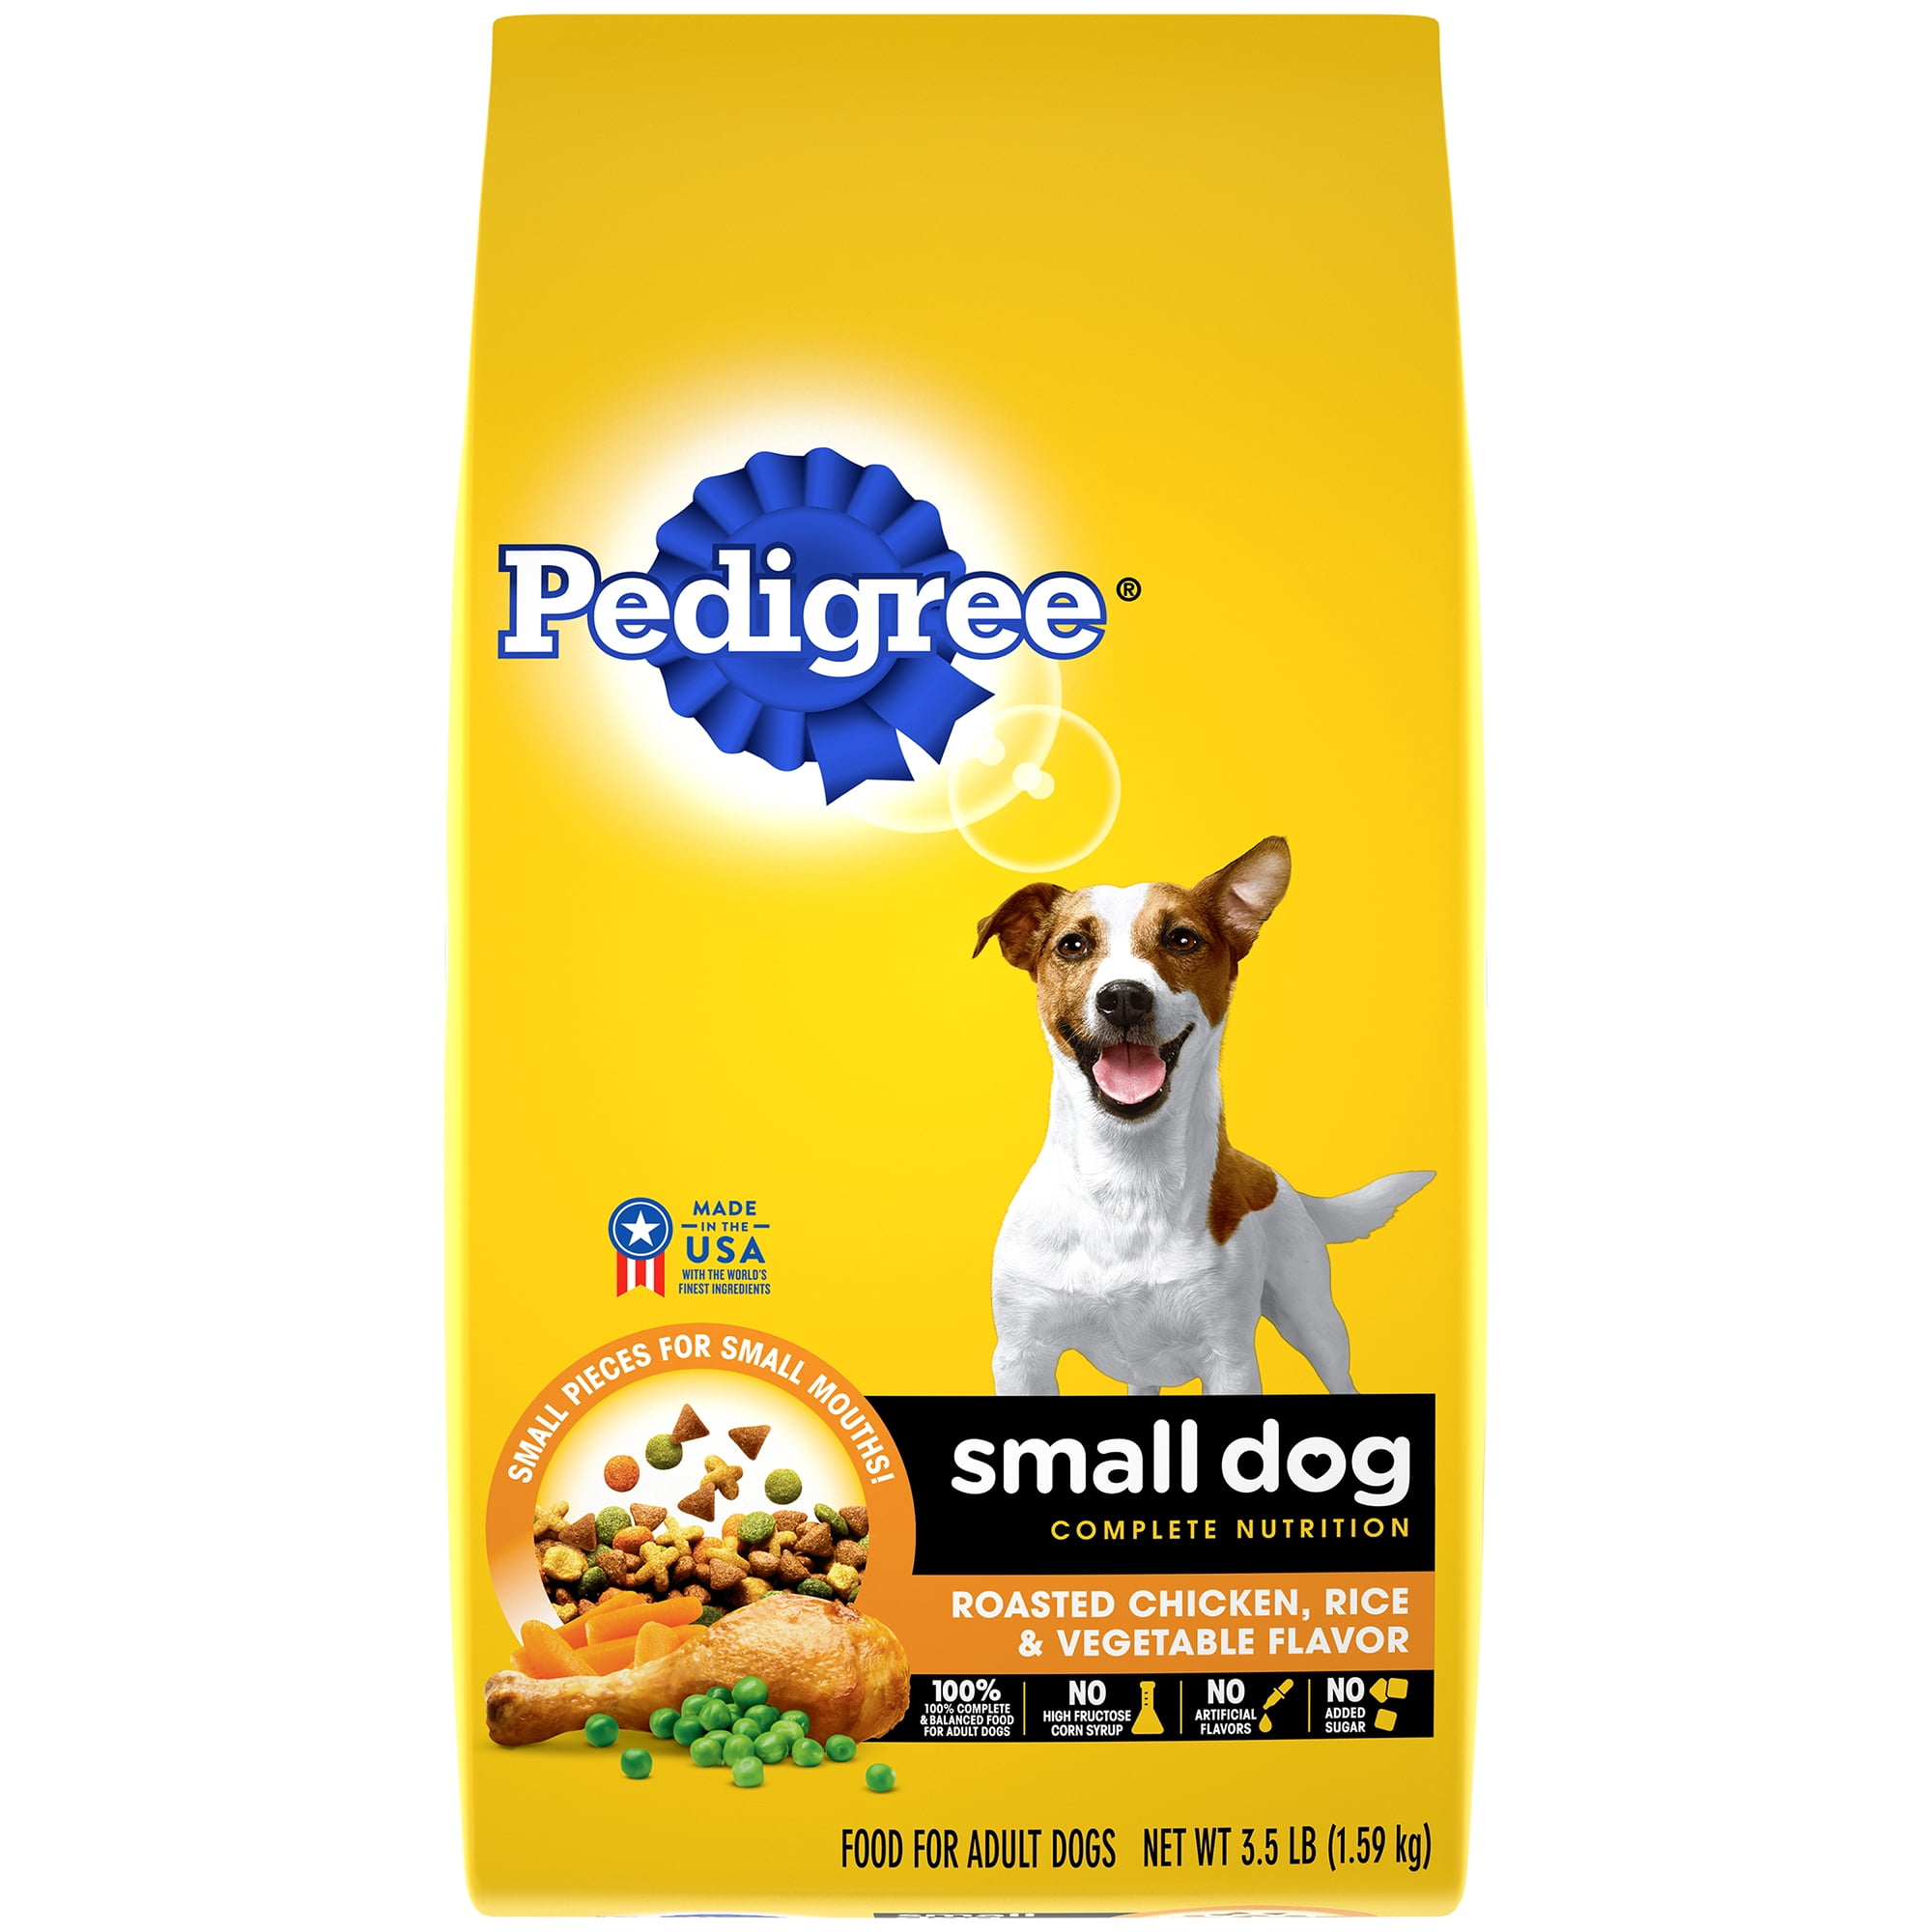 PEDIGREE Small Dog Complete Nutrition 